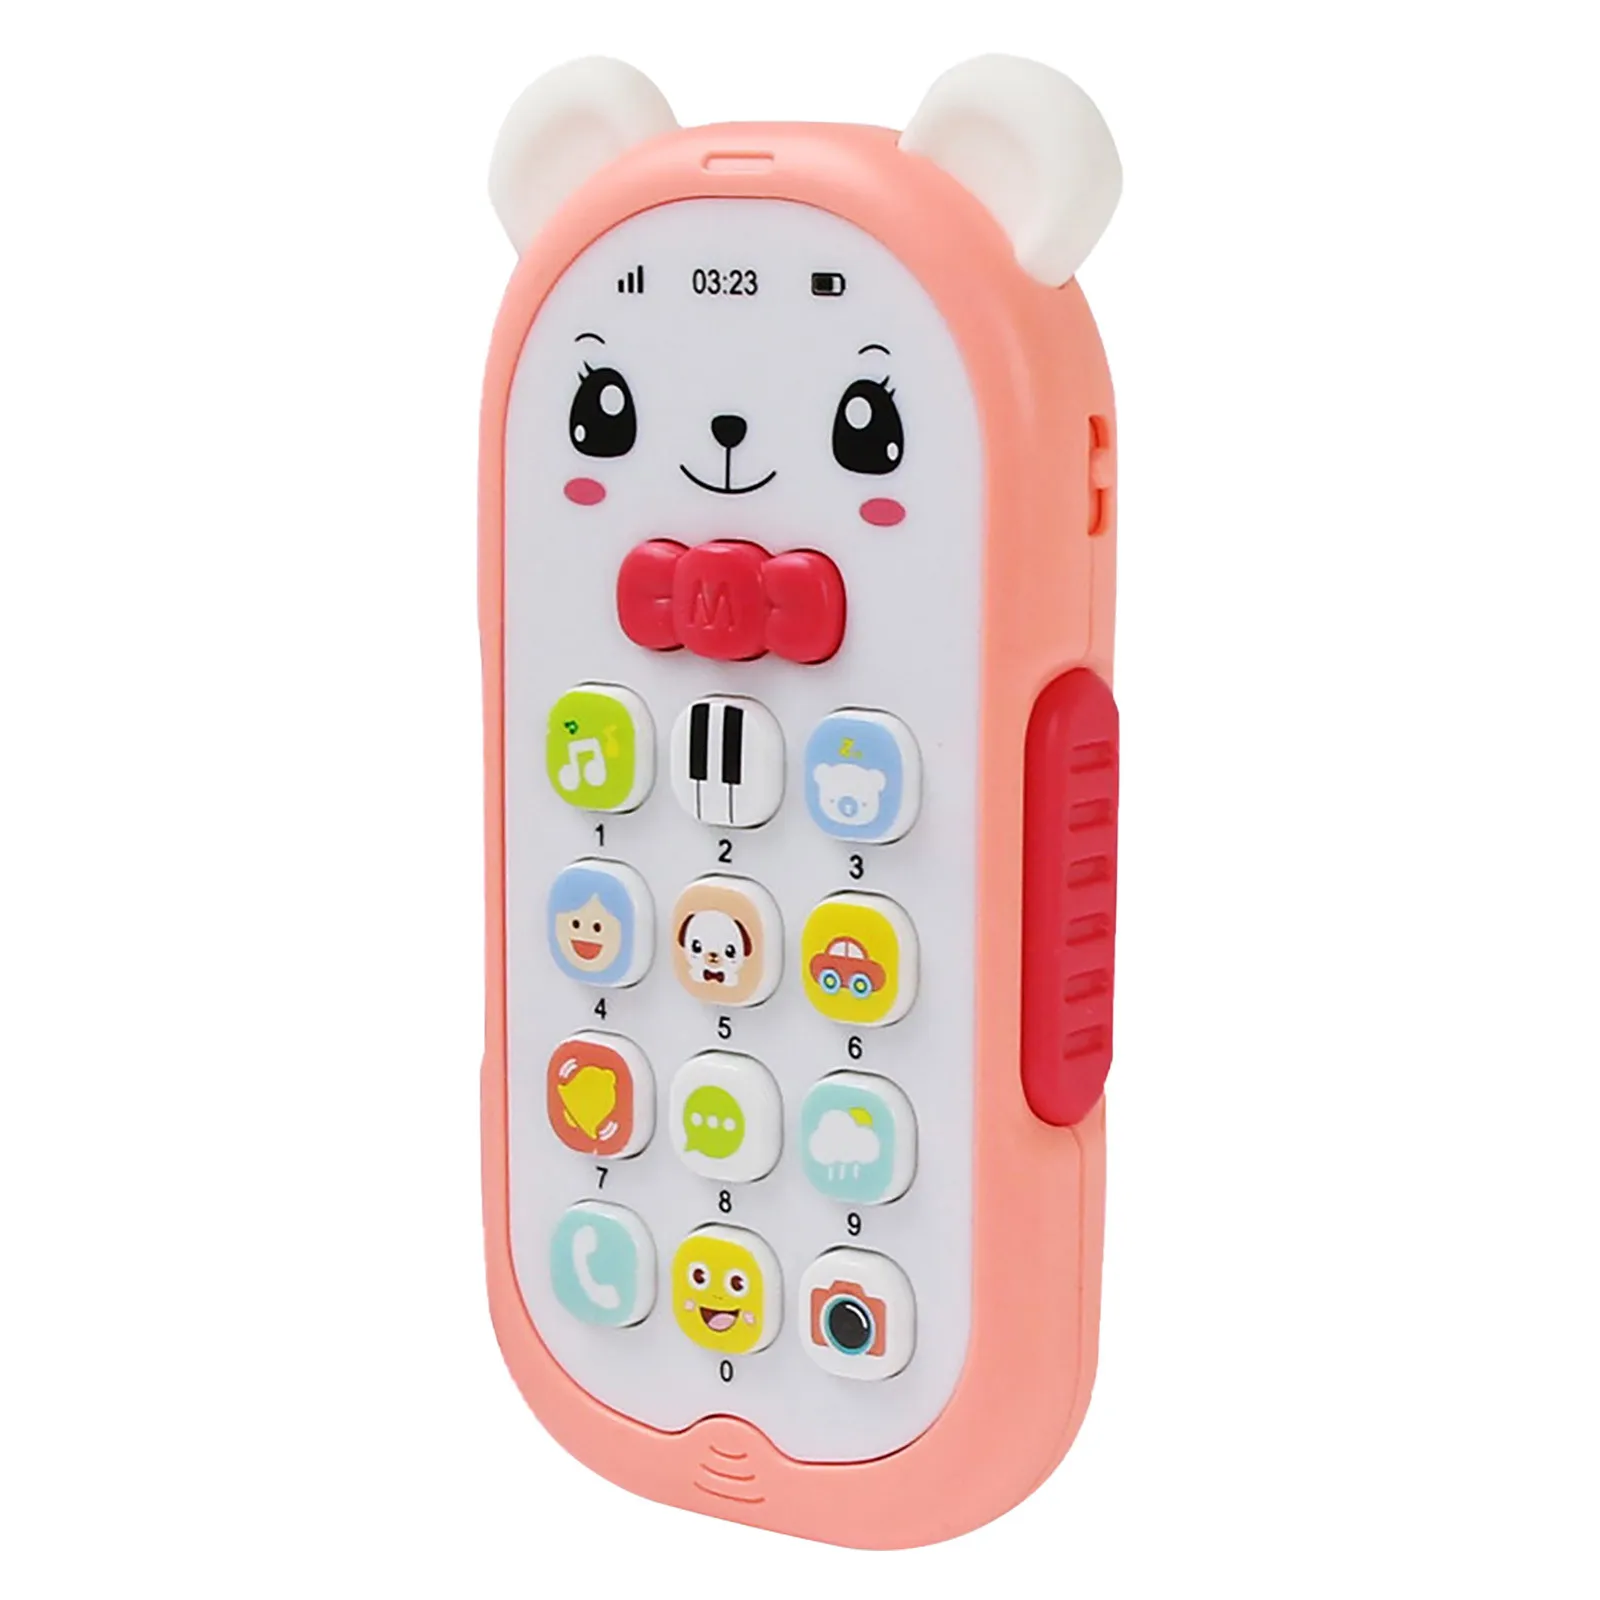 Baby Gutta-percha Toy Face Changing Music Mobile Phone Baby Toys Sleeping Artifact Simulation Telephone Early Educational Toy 9